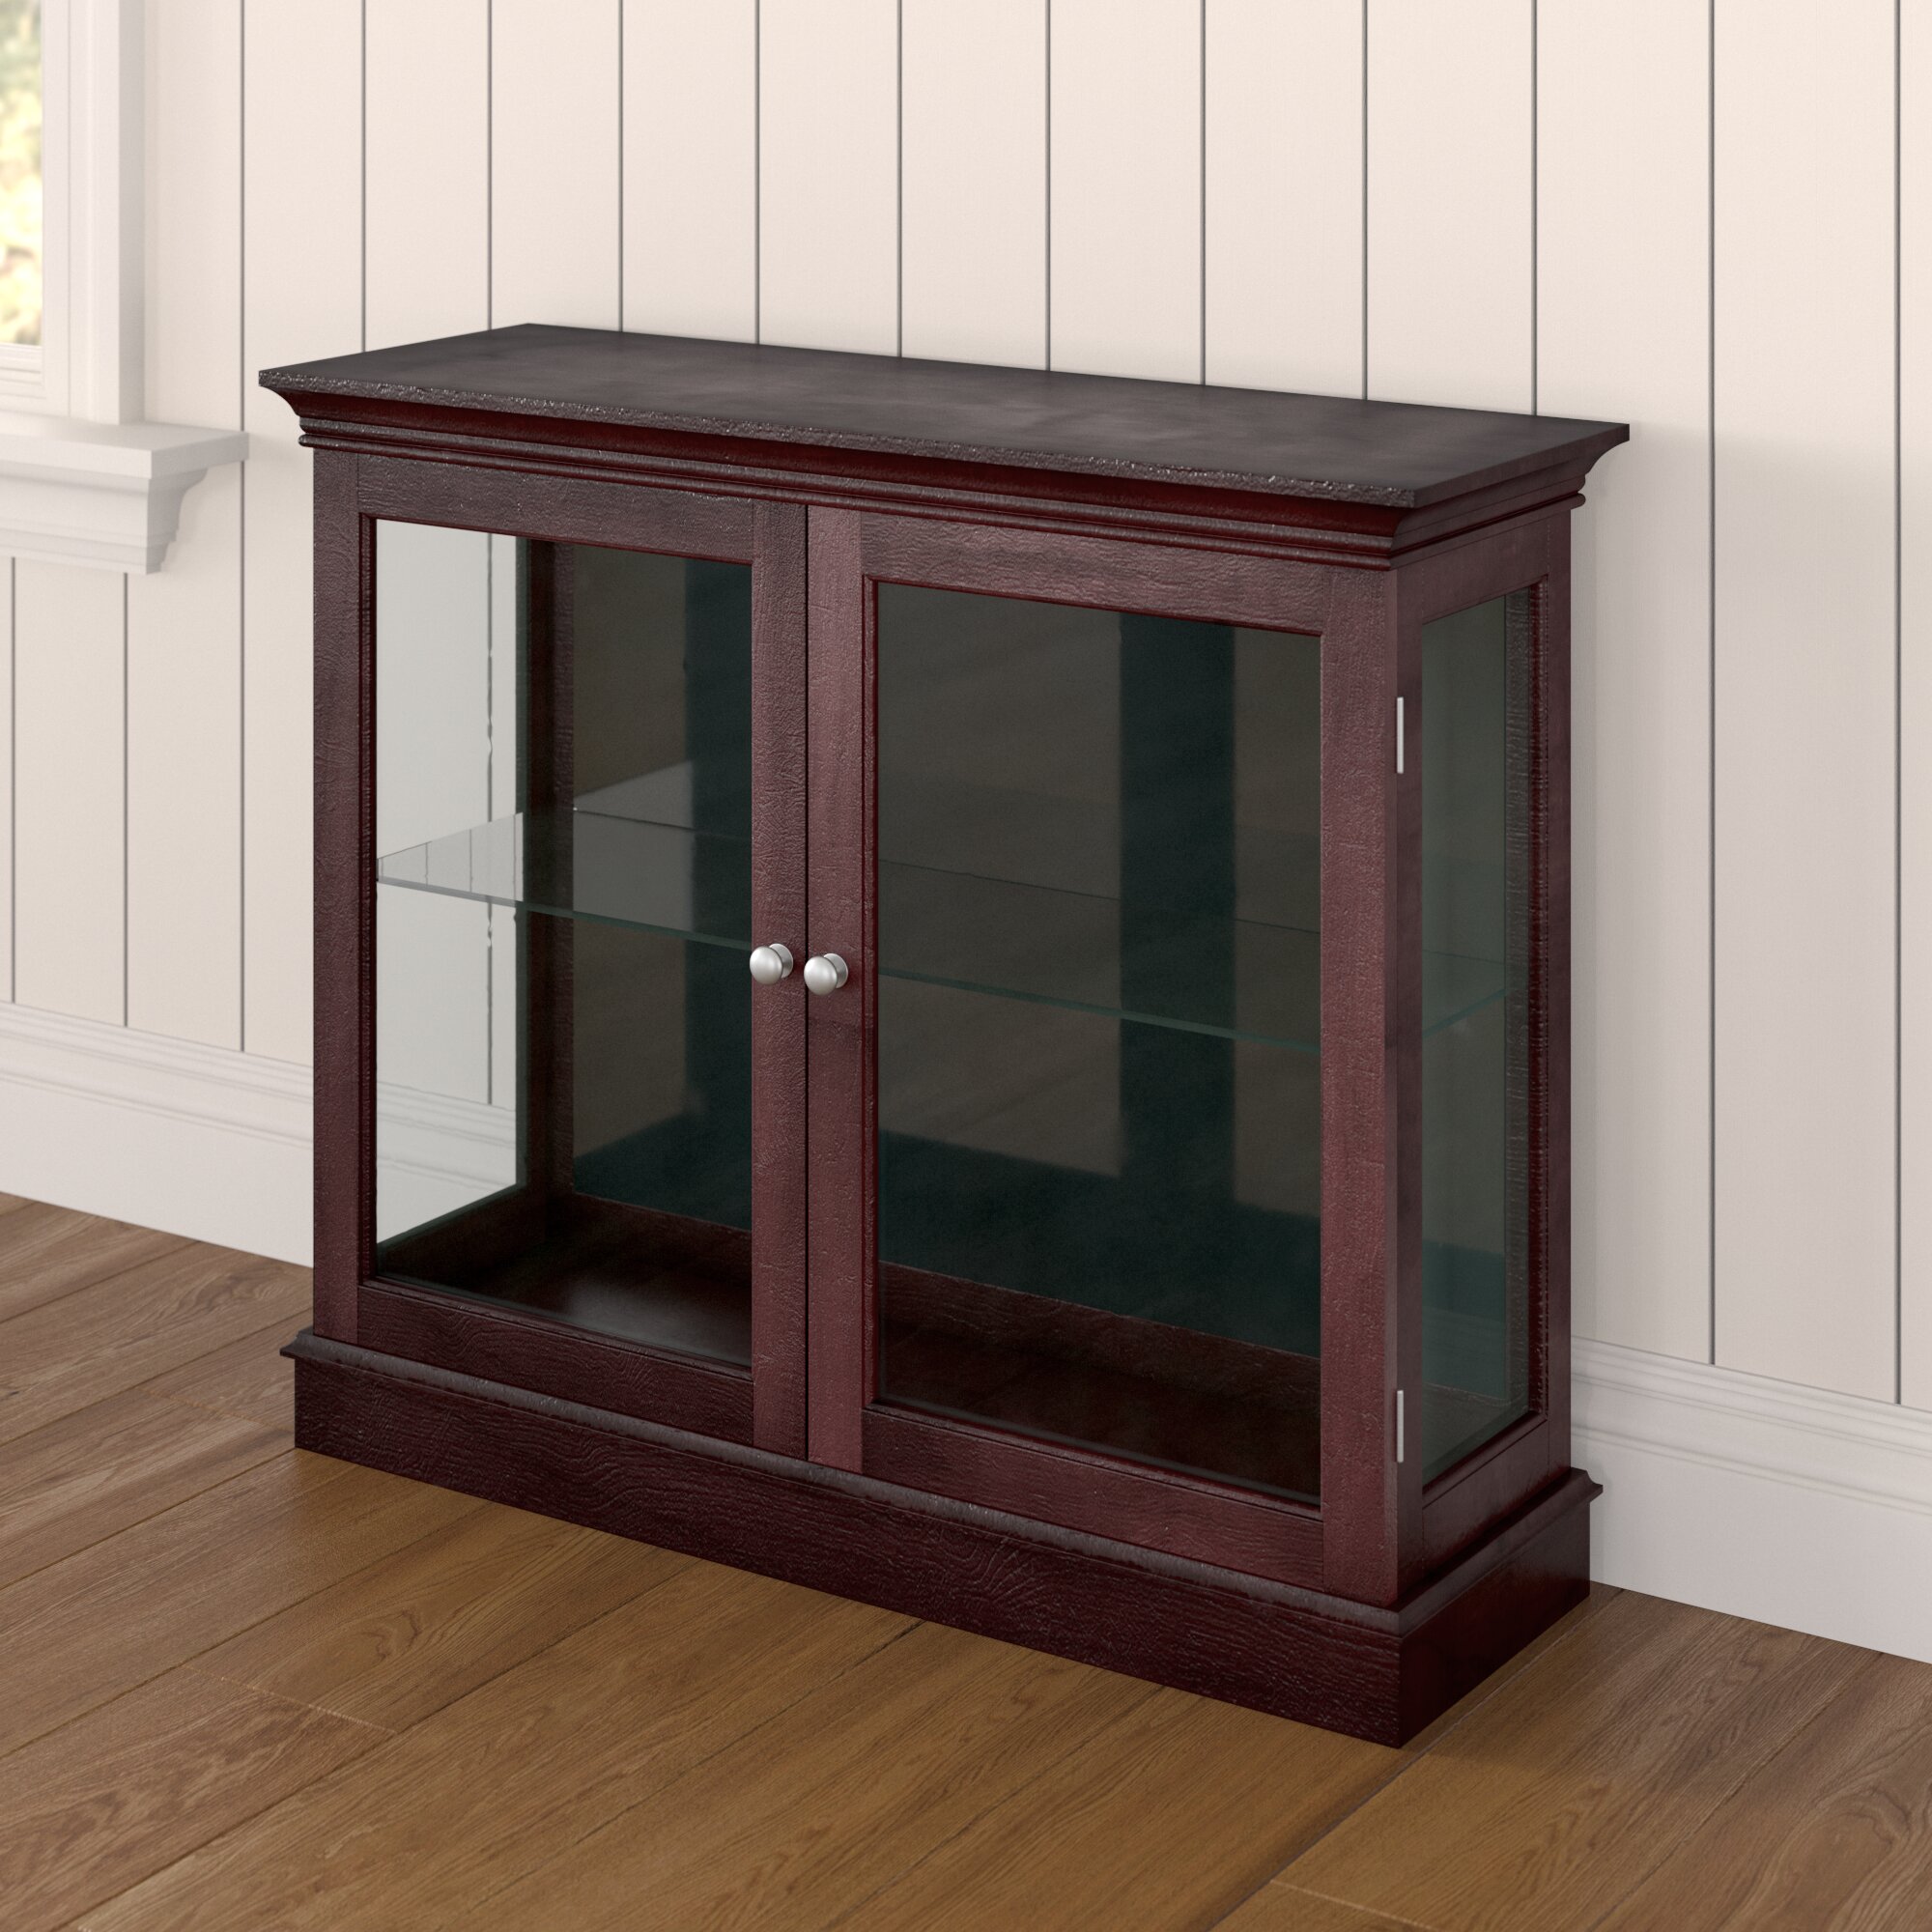 Charlton Home Grantham Floor Standing Curio Cabinet Reviews